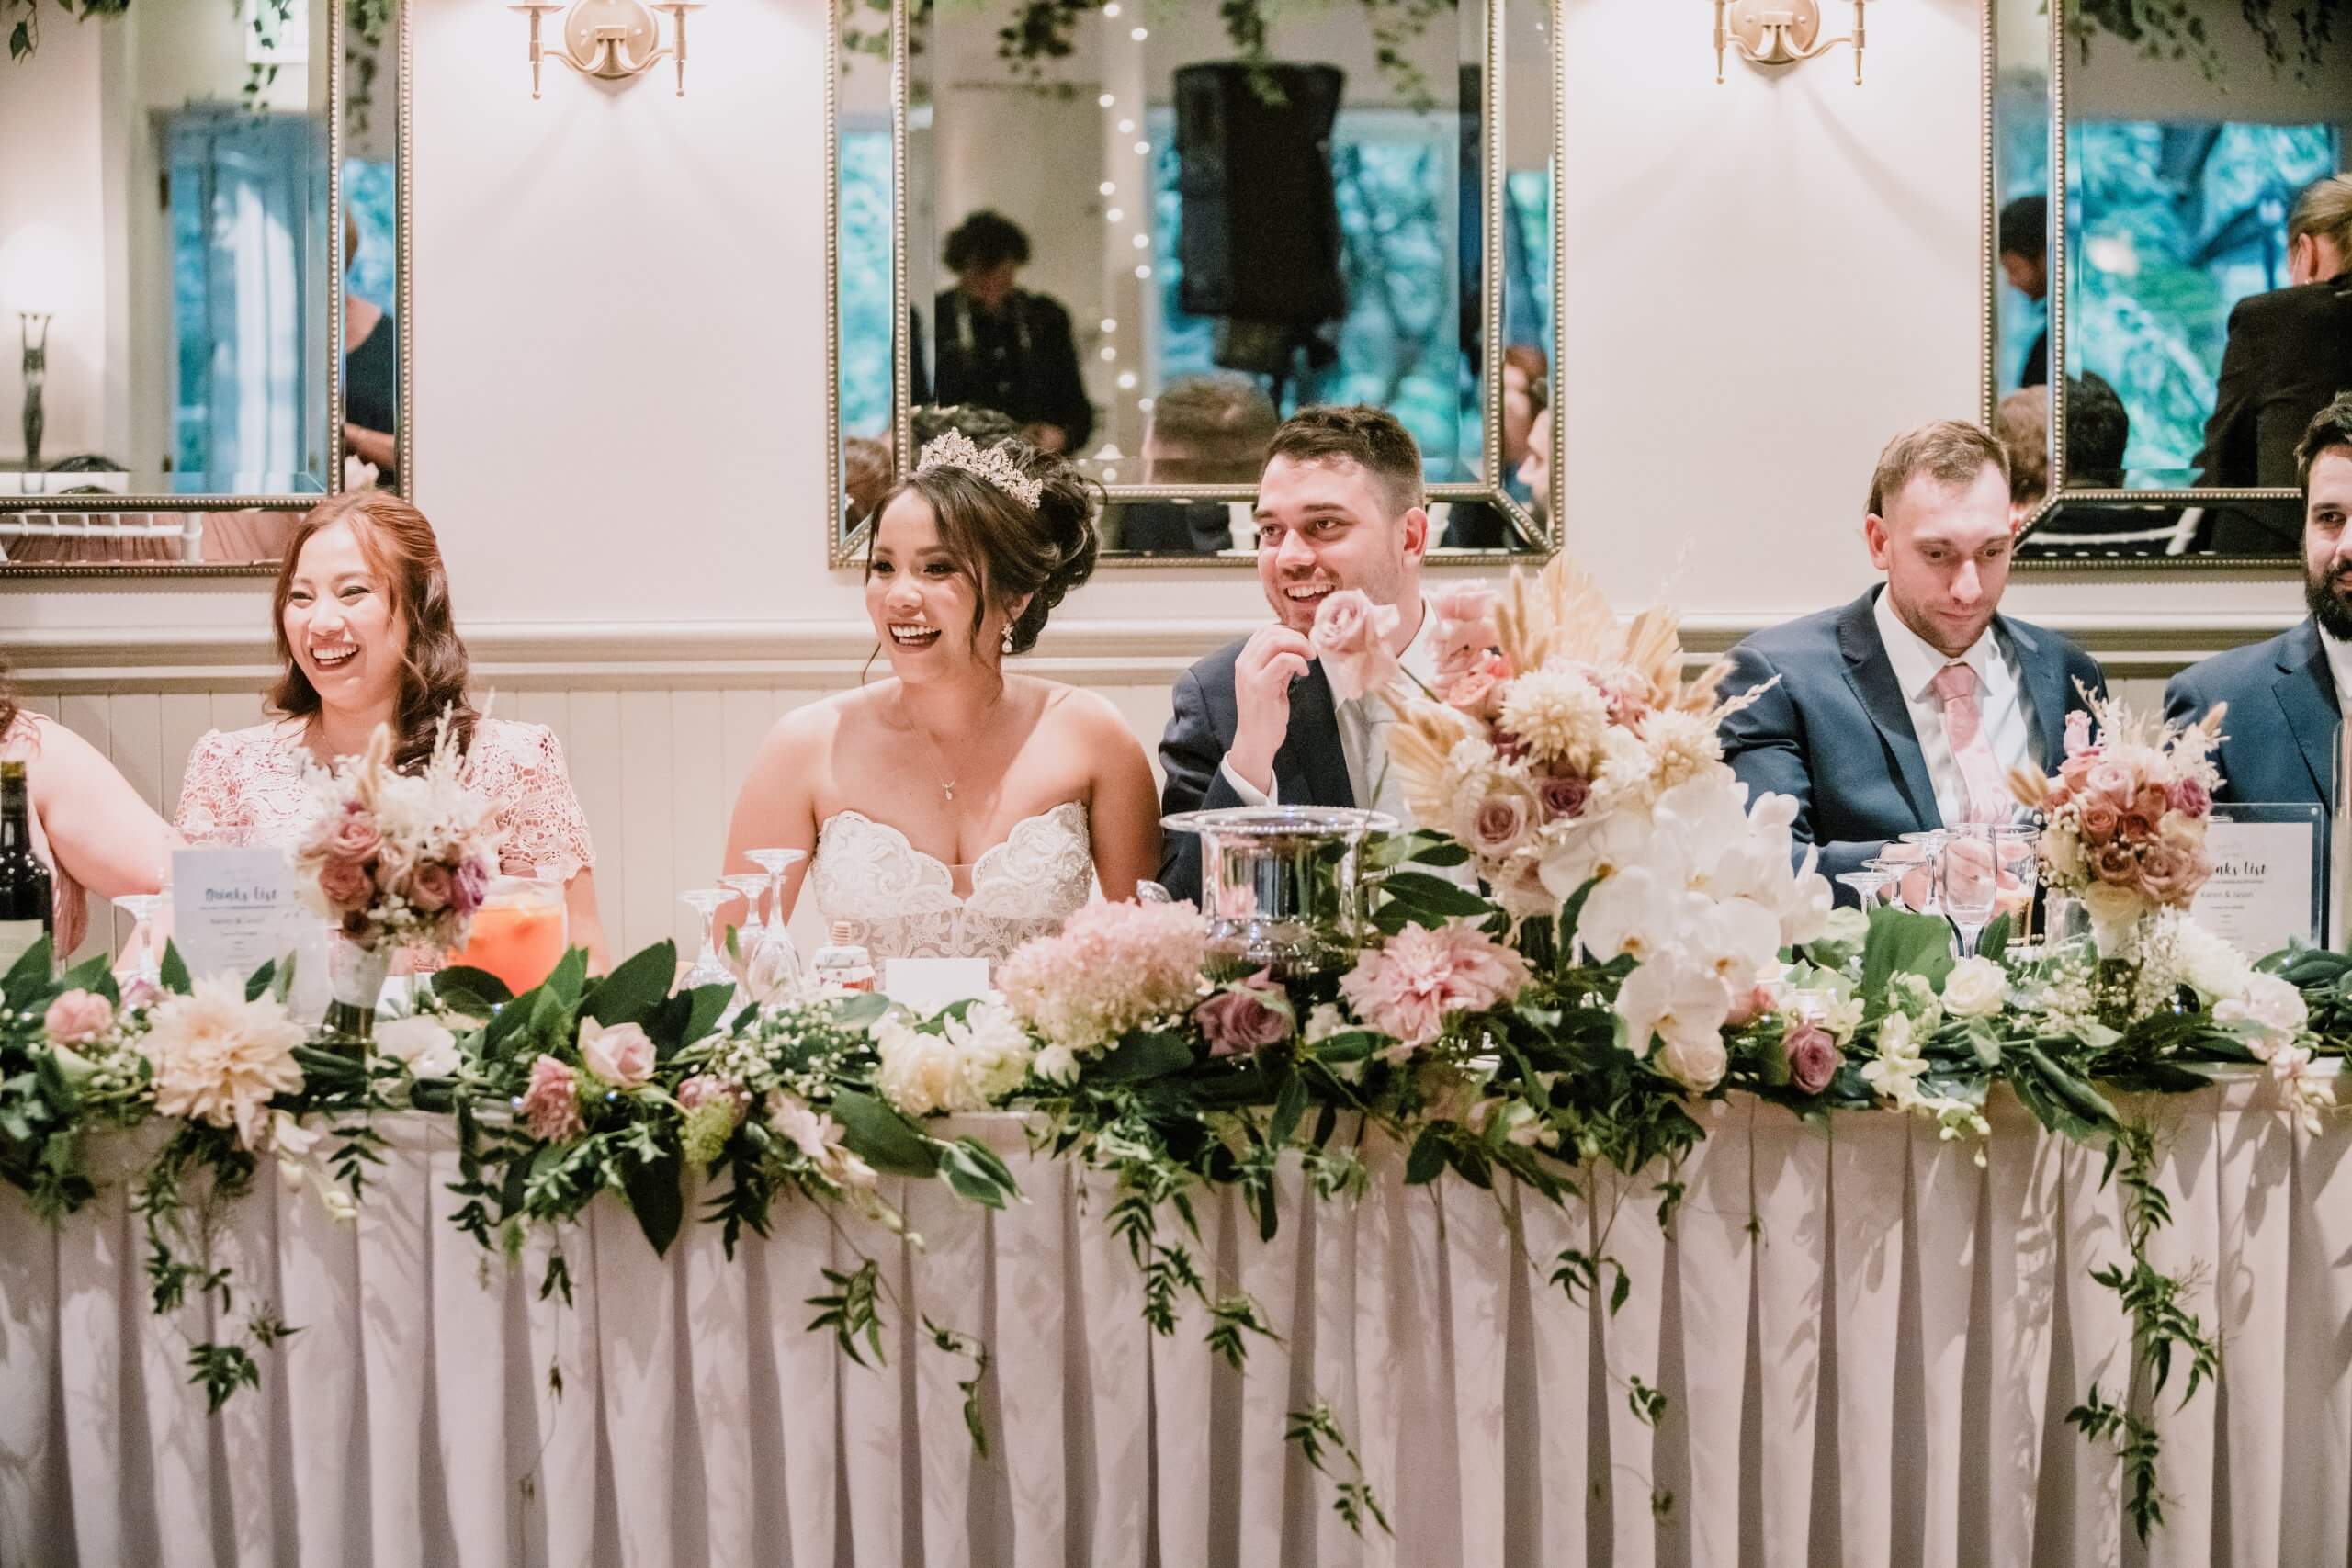 Bridal party sitting on the long table adorned by beautiful flowers and sharing a good laugh.